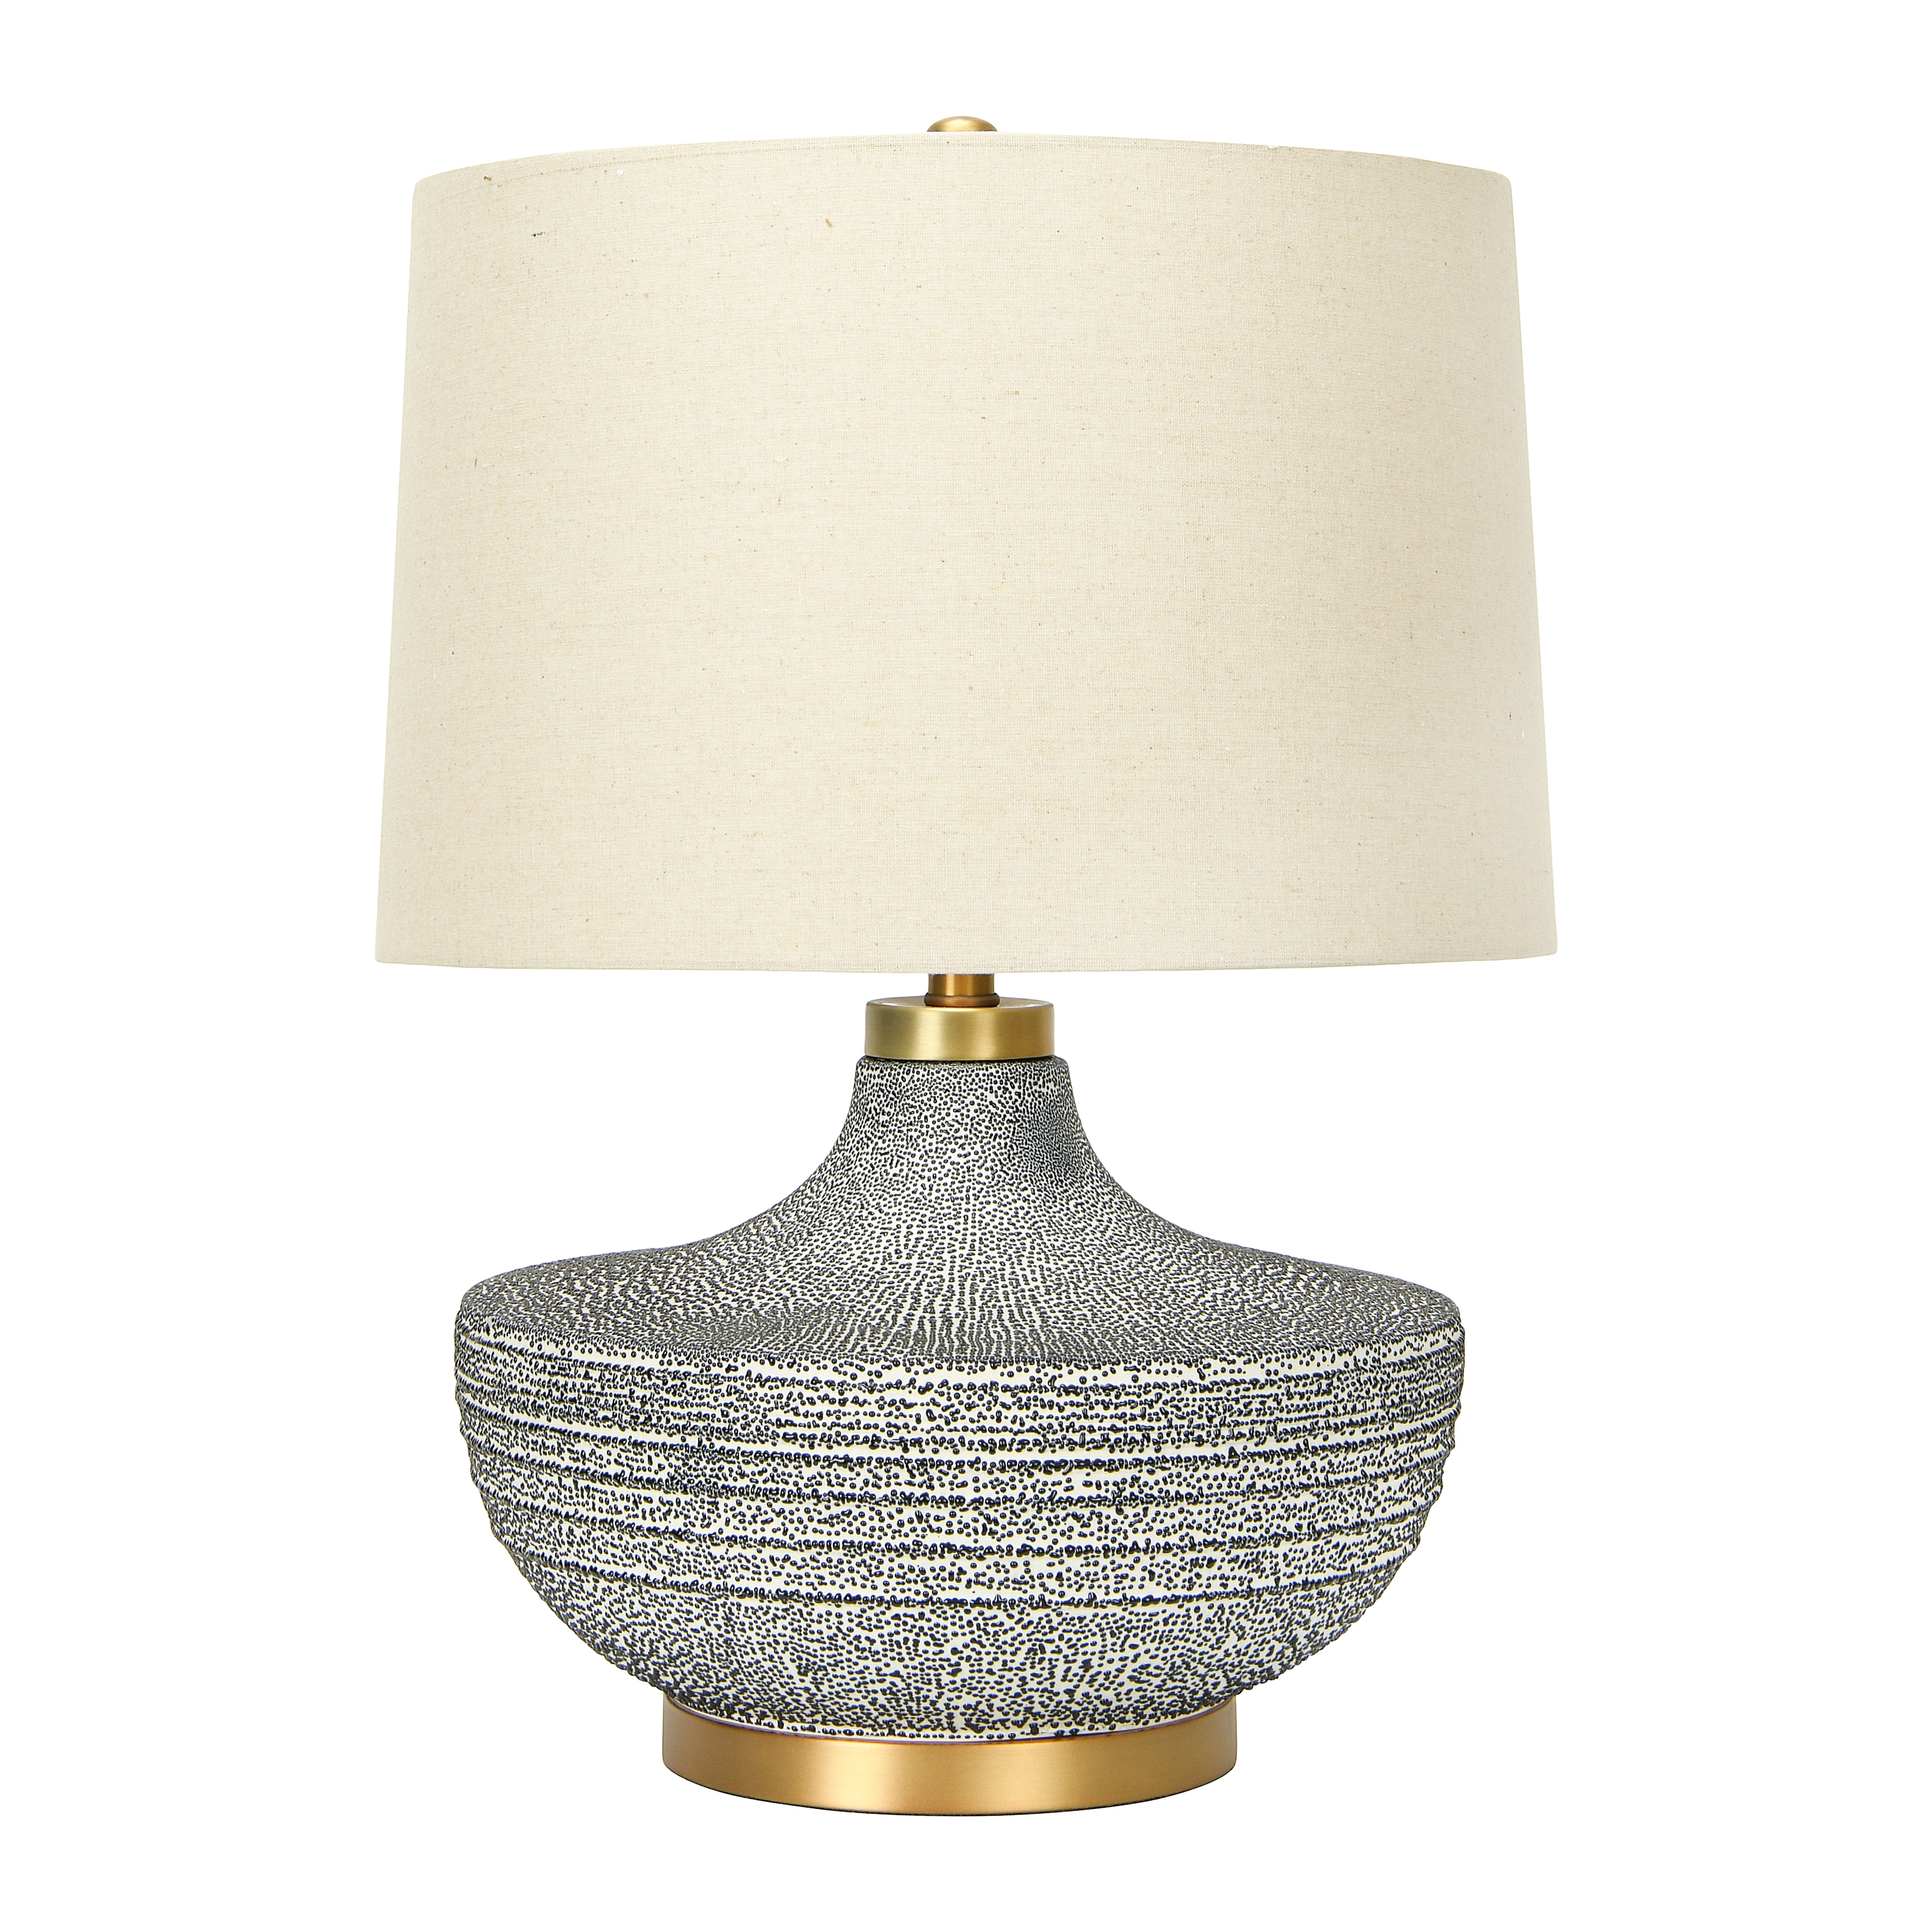 Textured Blue Glaze Ceramic Table Lamp with Natural Linen Shade - Image 0